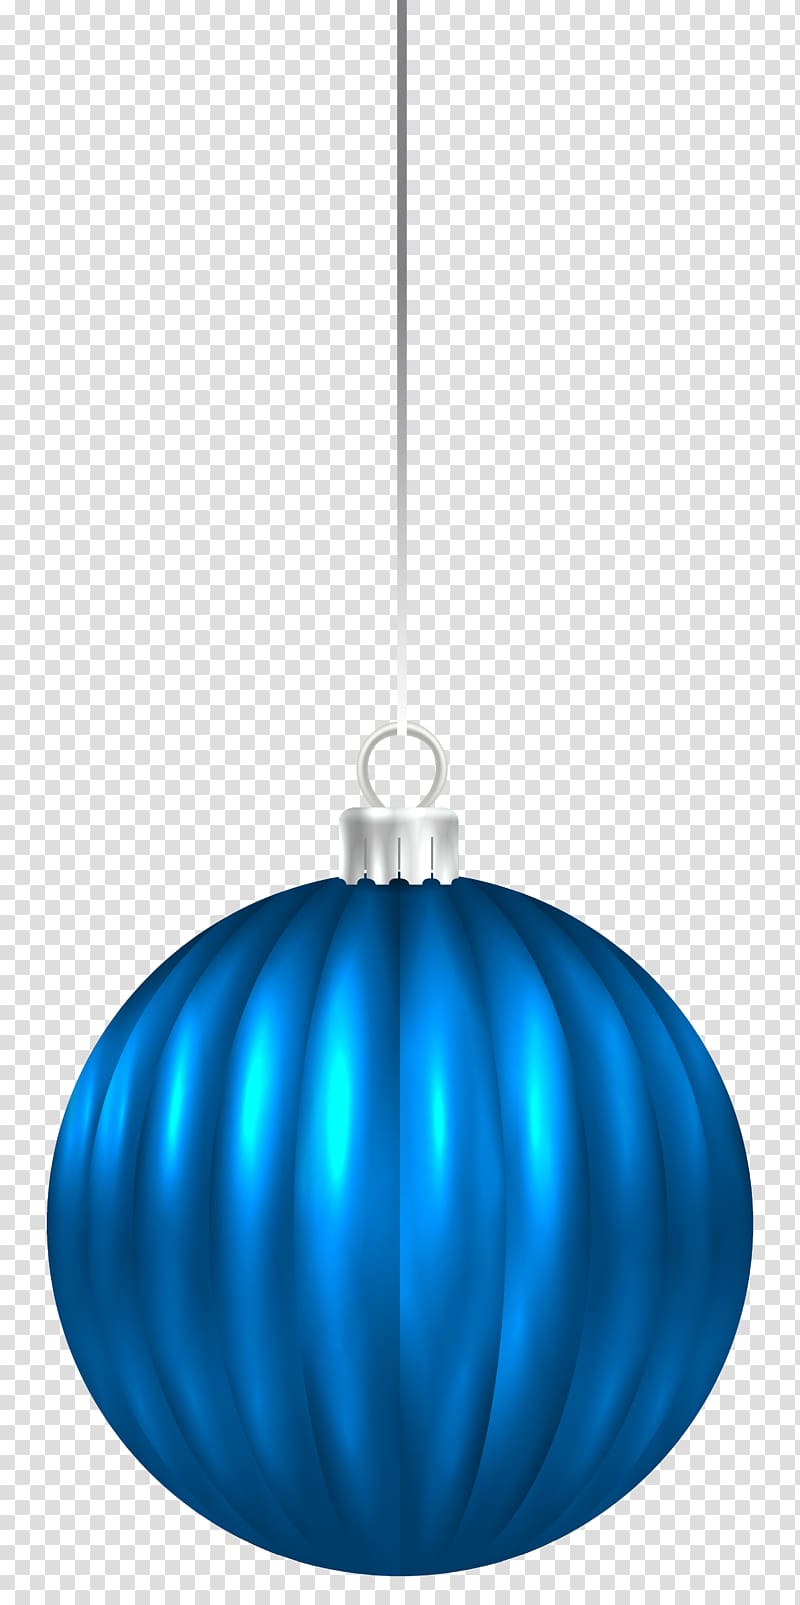 blue bauble , Blue Lighting Sphere Christmas ornament Pattern, Blue Christmas Ball Ornament transparent background PNG clipart